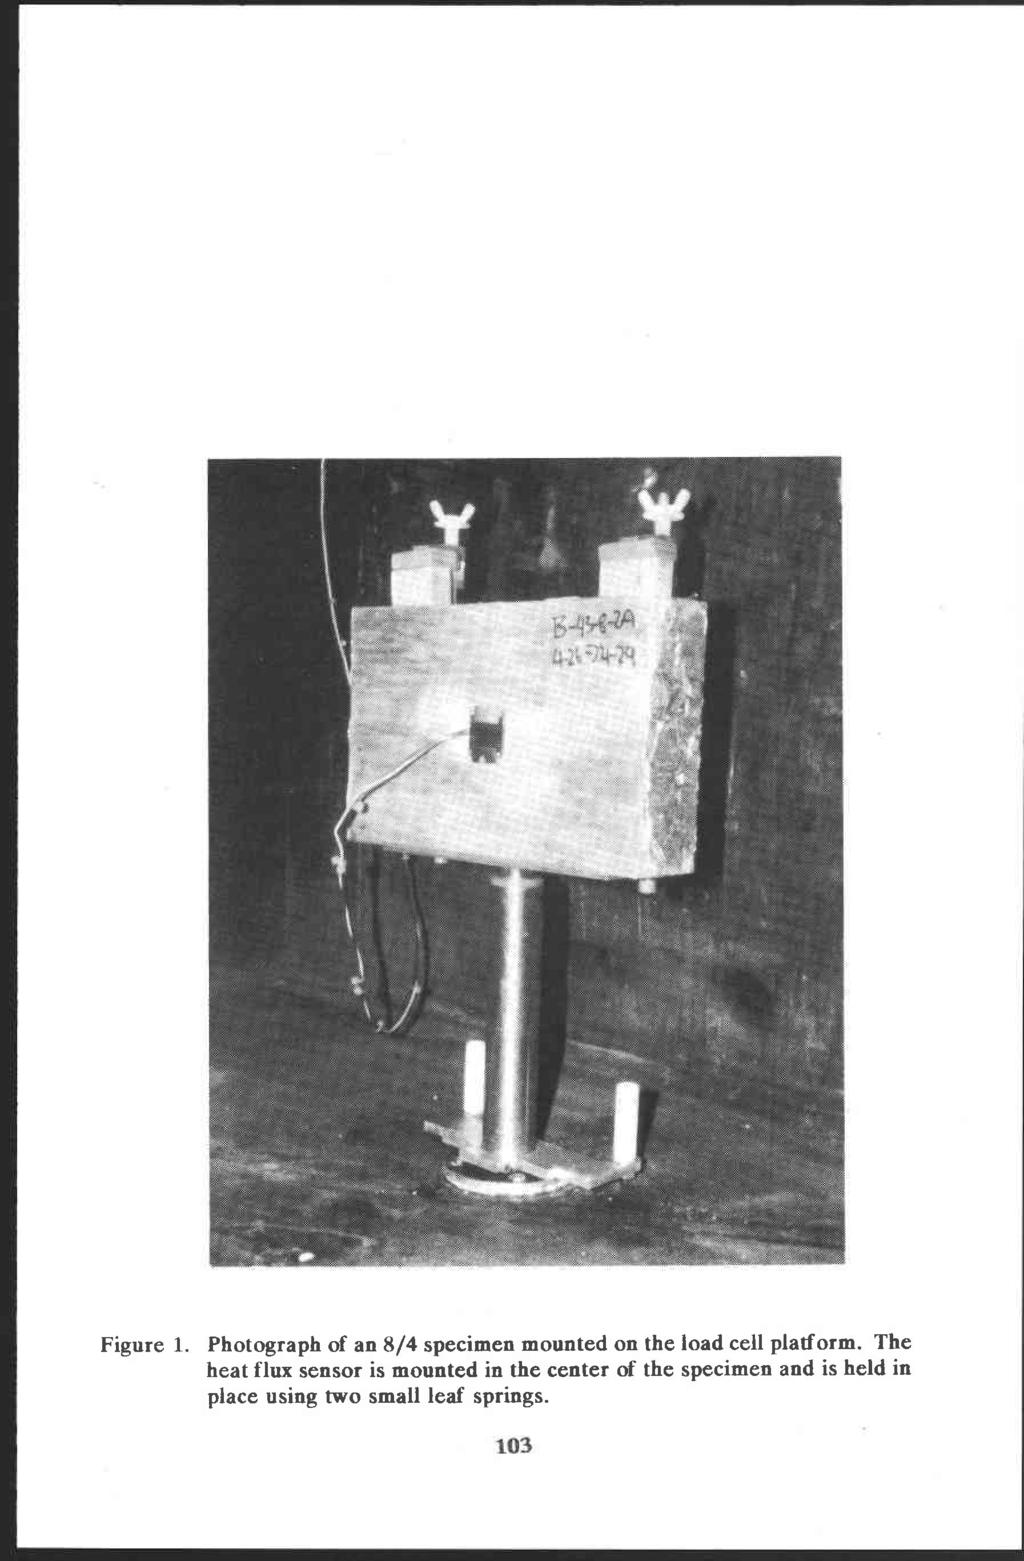 Figure 1. Photograph of an 8/4 specimen mounted on the load cell platform.